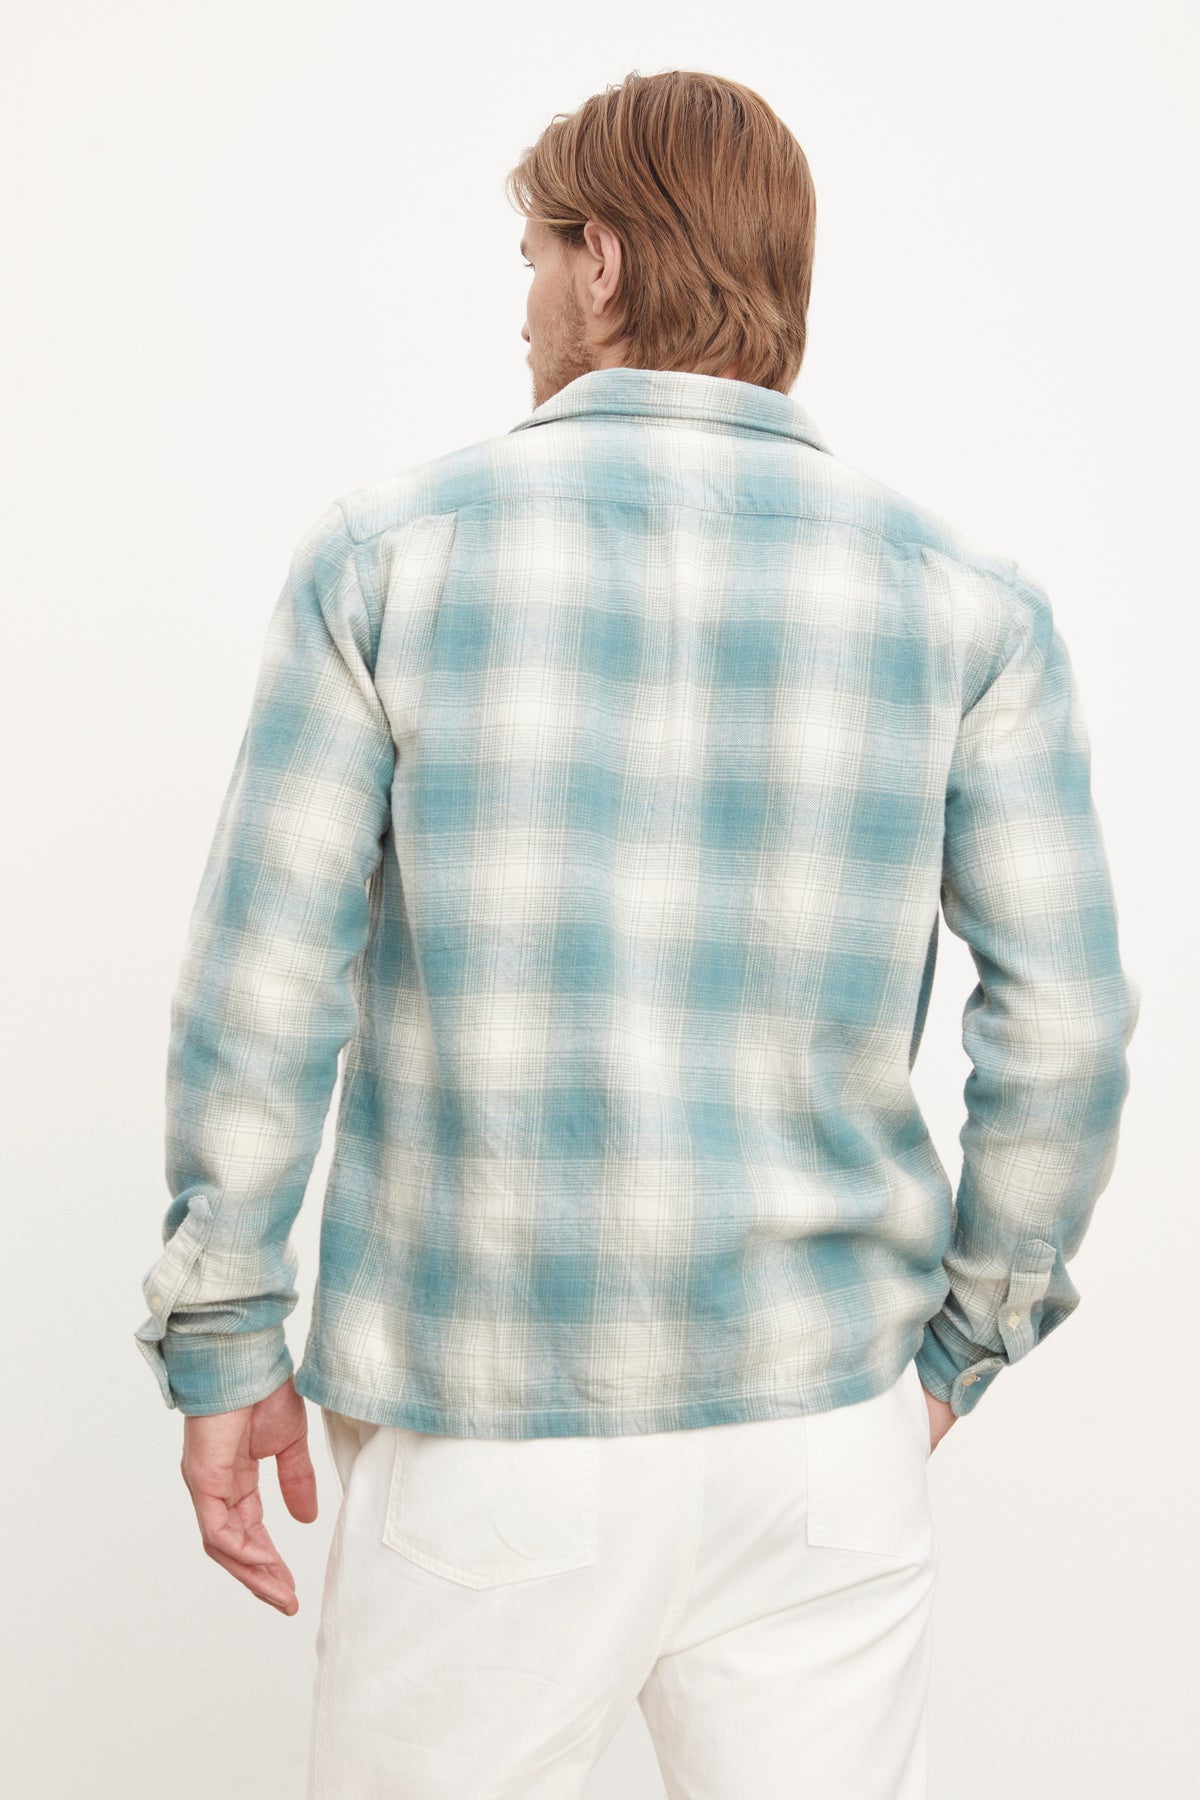 The back view of a man wearing a Velvet by Graham & Spencer ANDREW BUTTON-UP SHIRT.-36009000632513